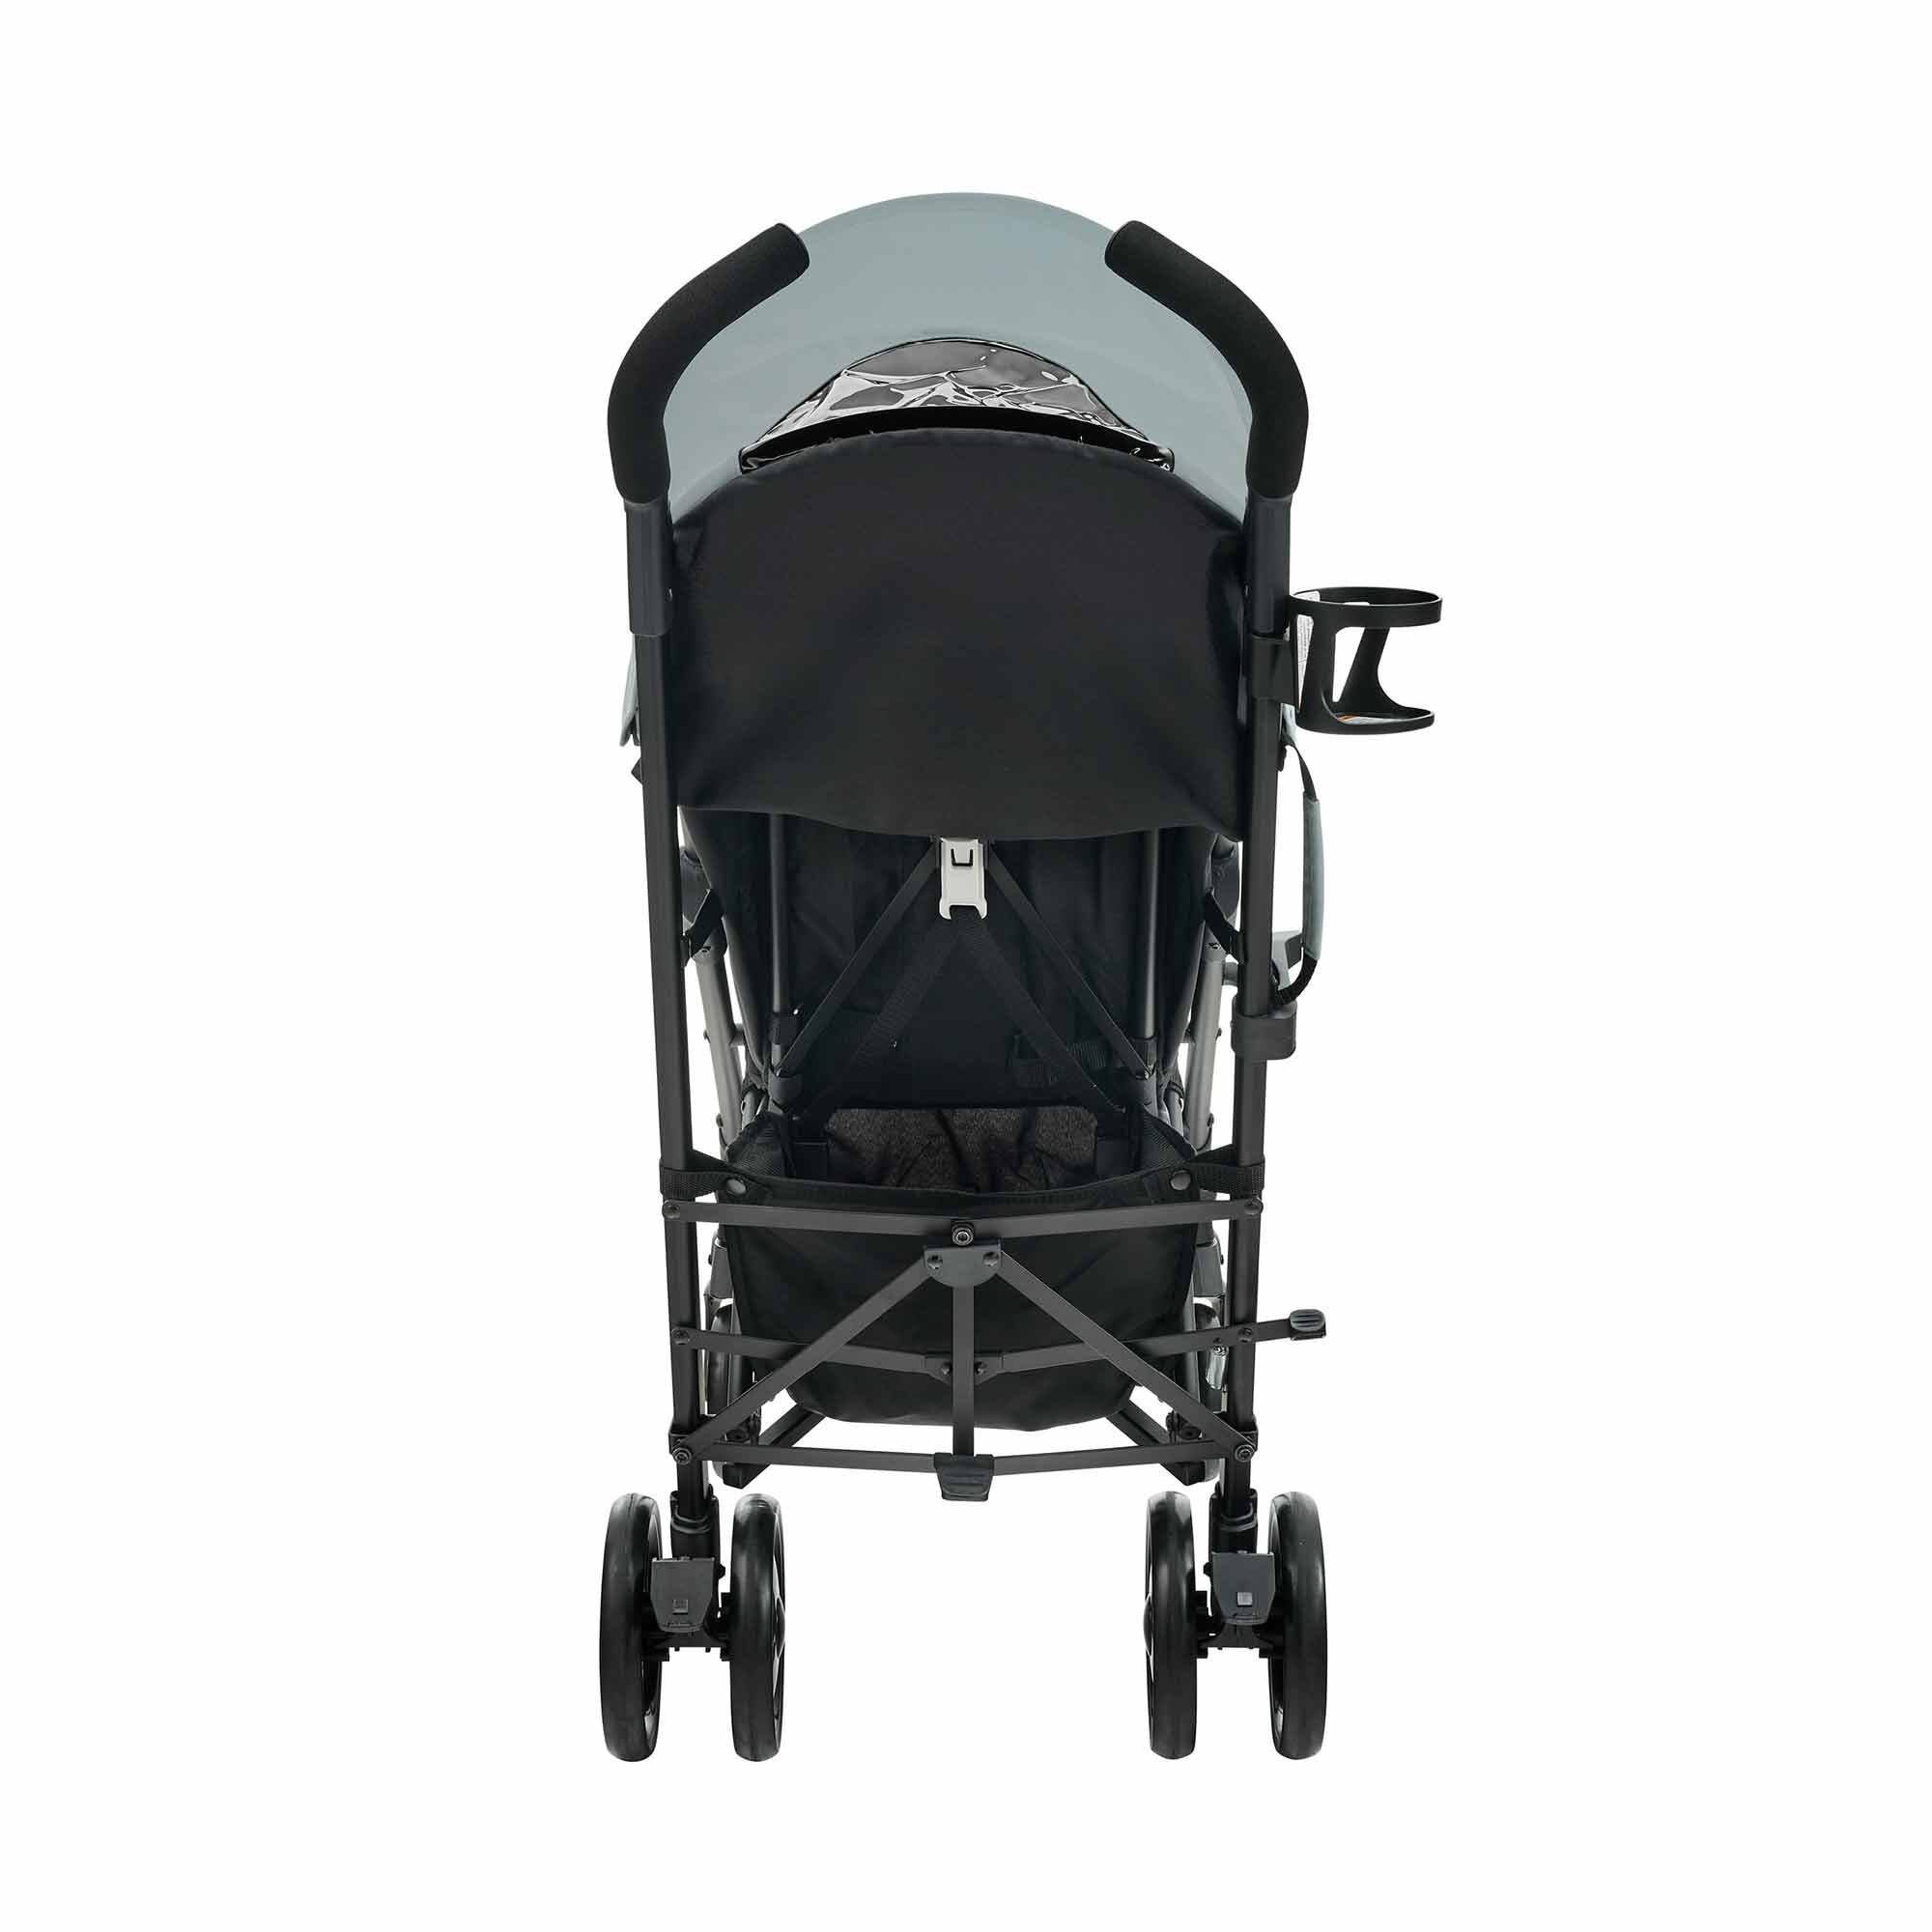 Astral - Chicco | Liteway Chicco Stroller